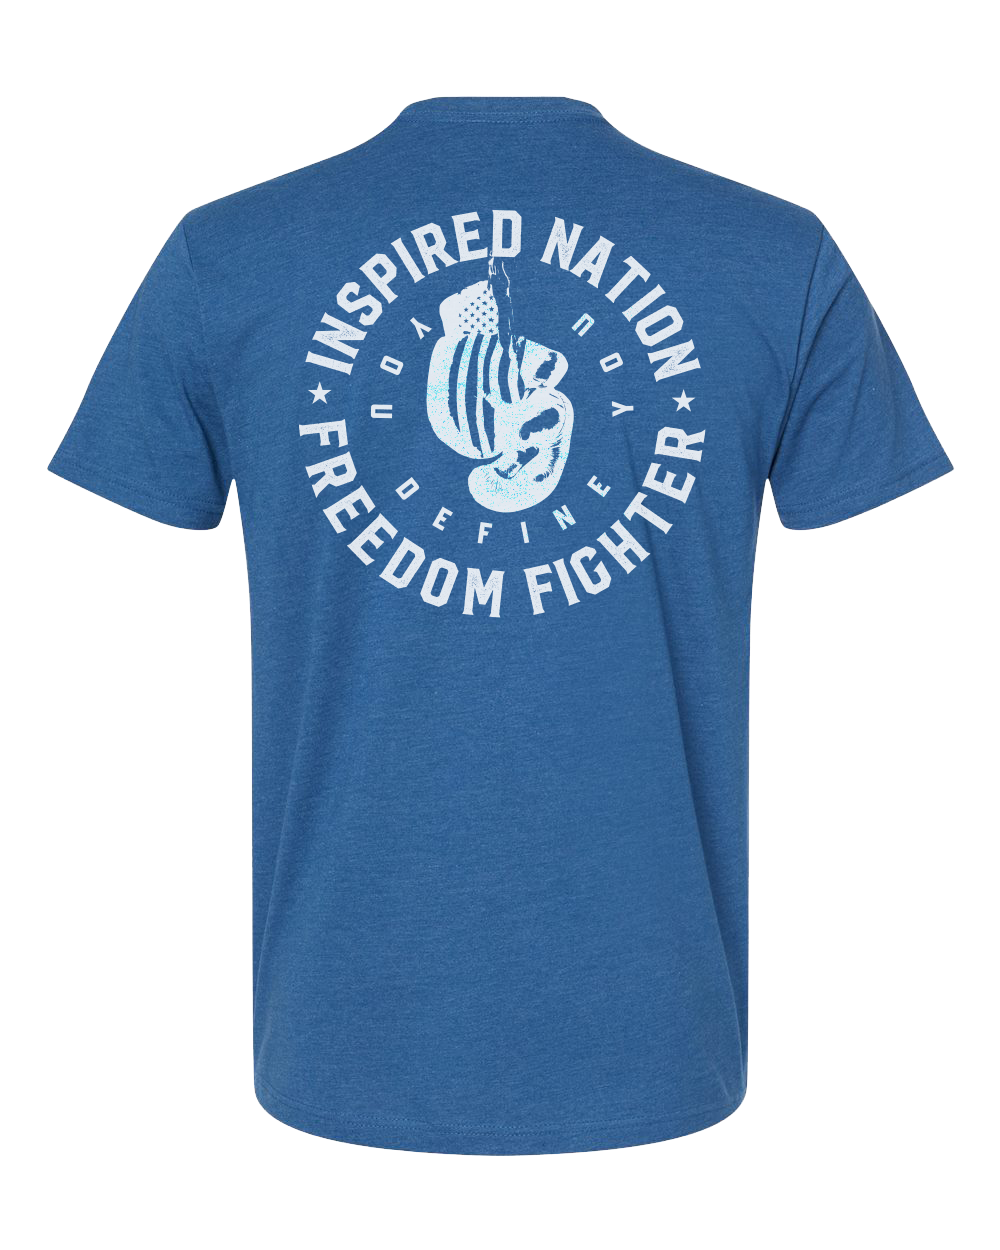 Freedom Fighter Tee